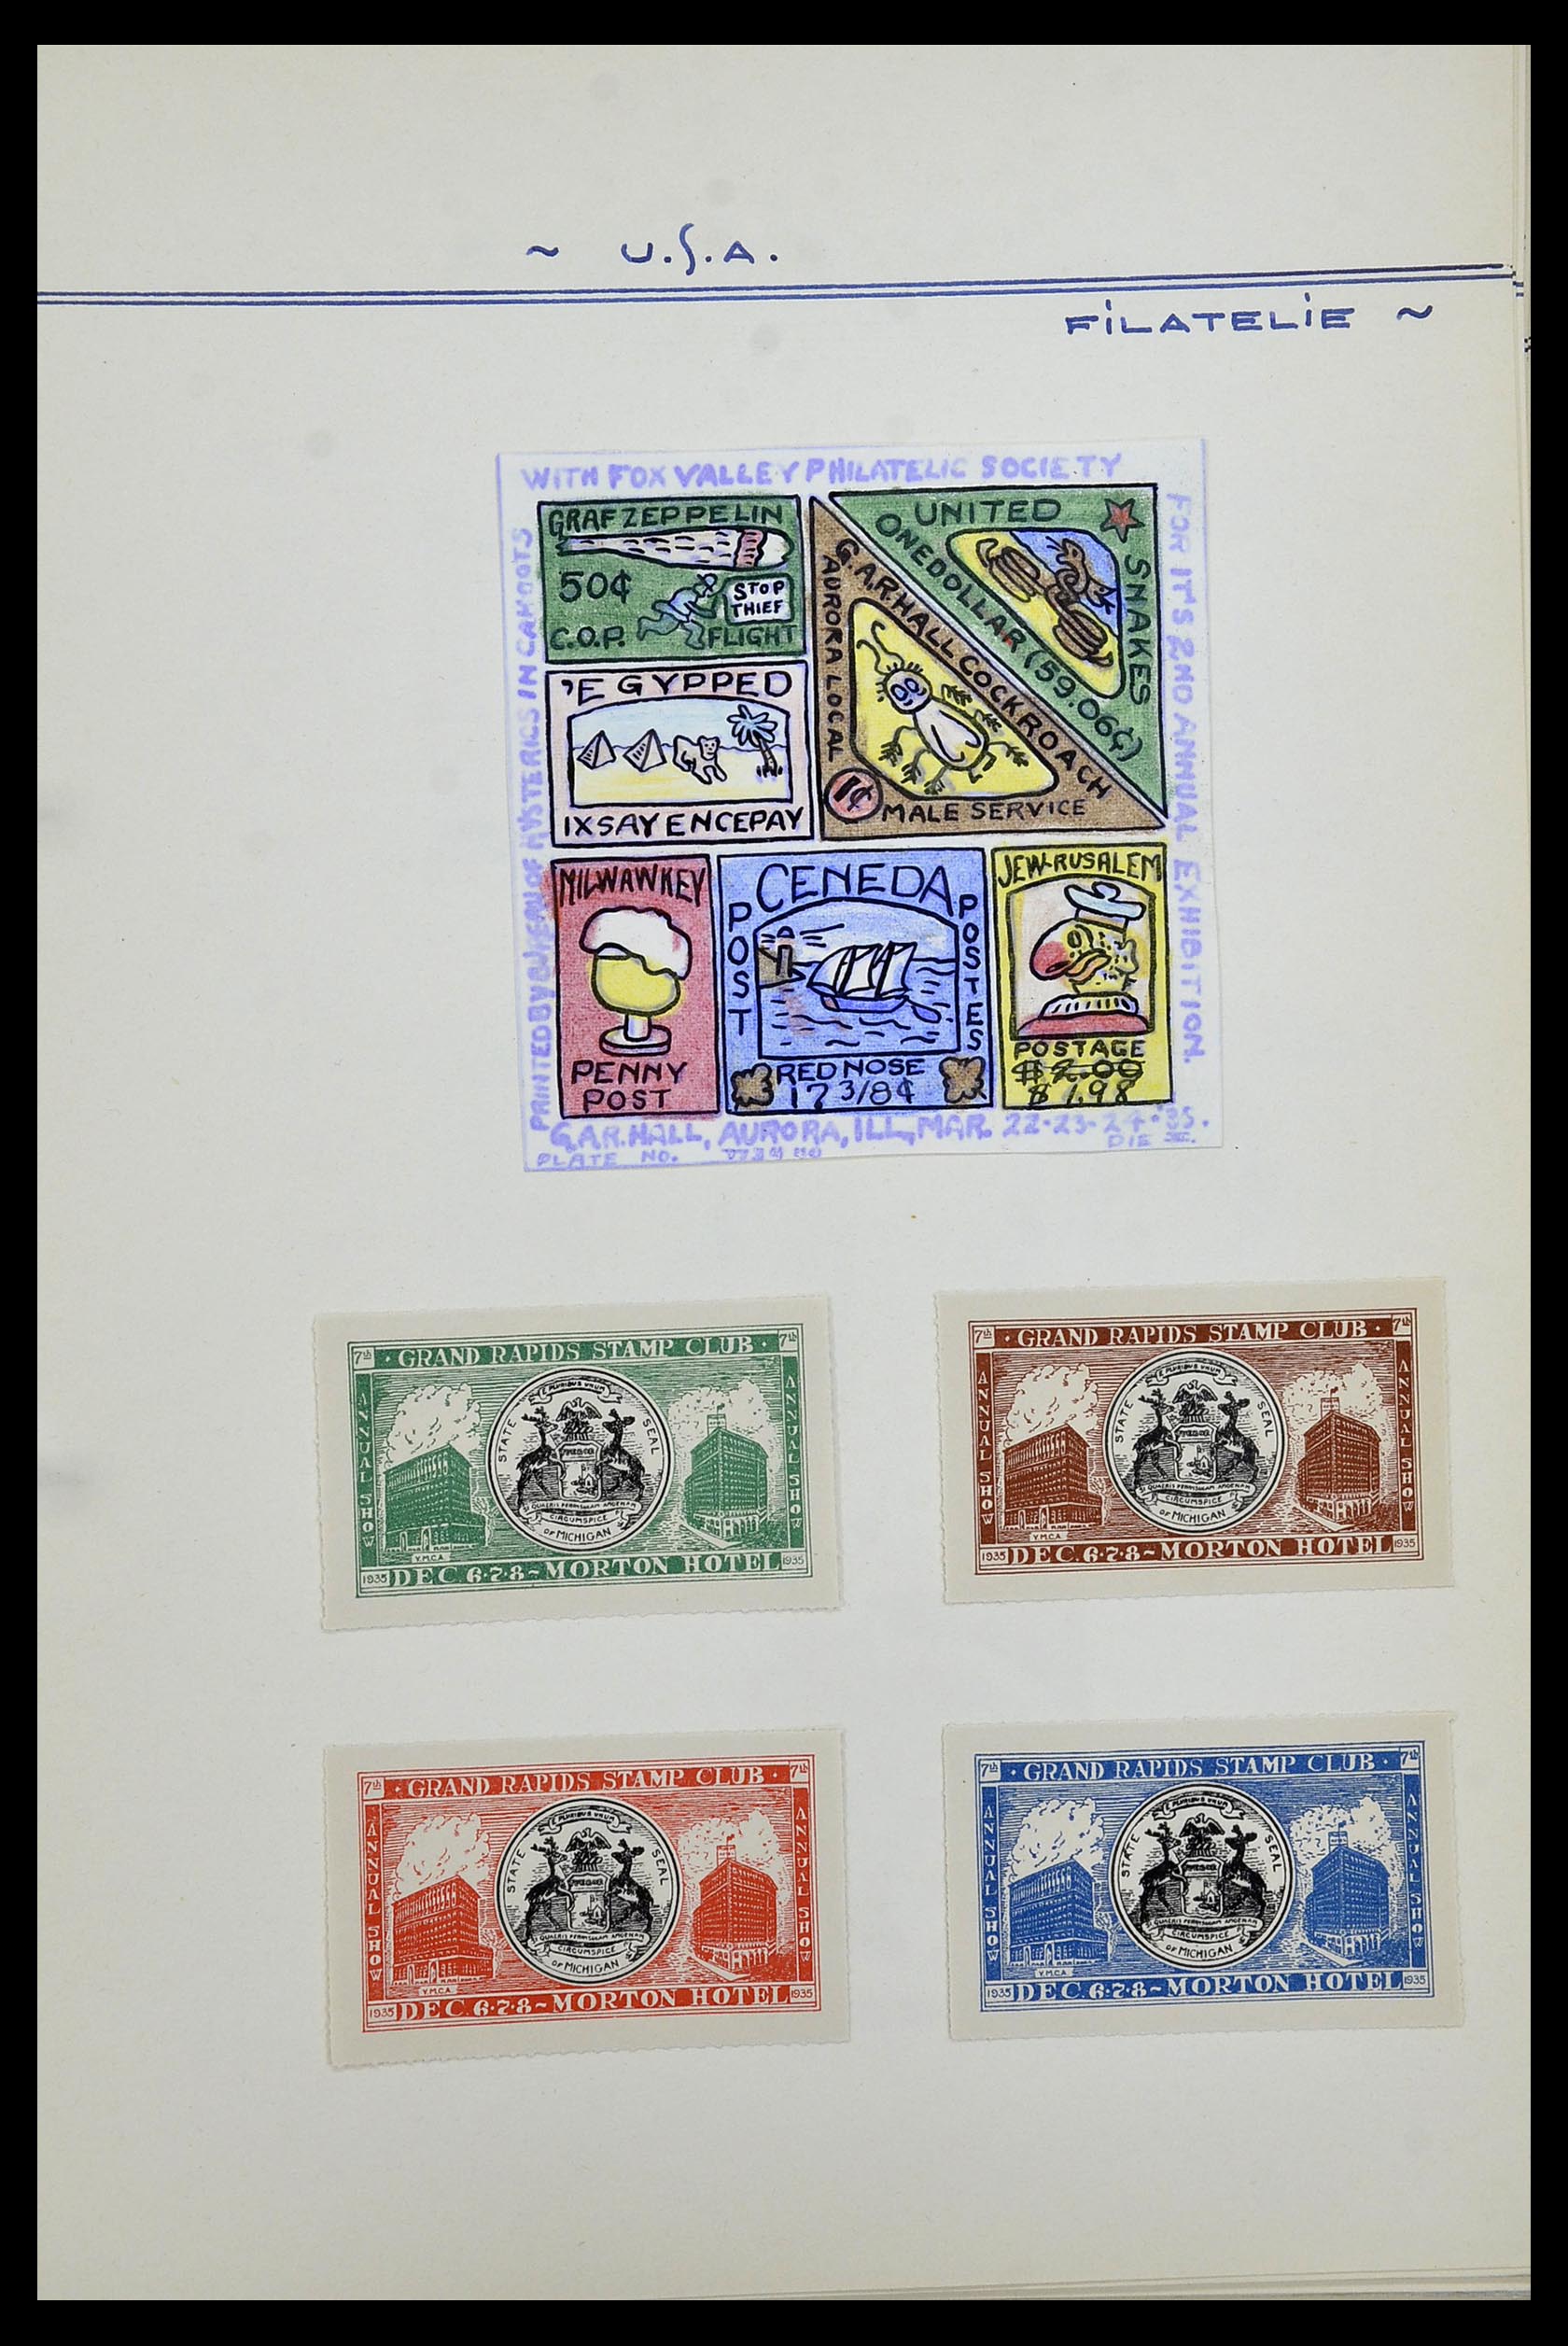 34486 024 - Stamp Collection 34486 USA philatelic labels 1926-1960.